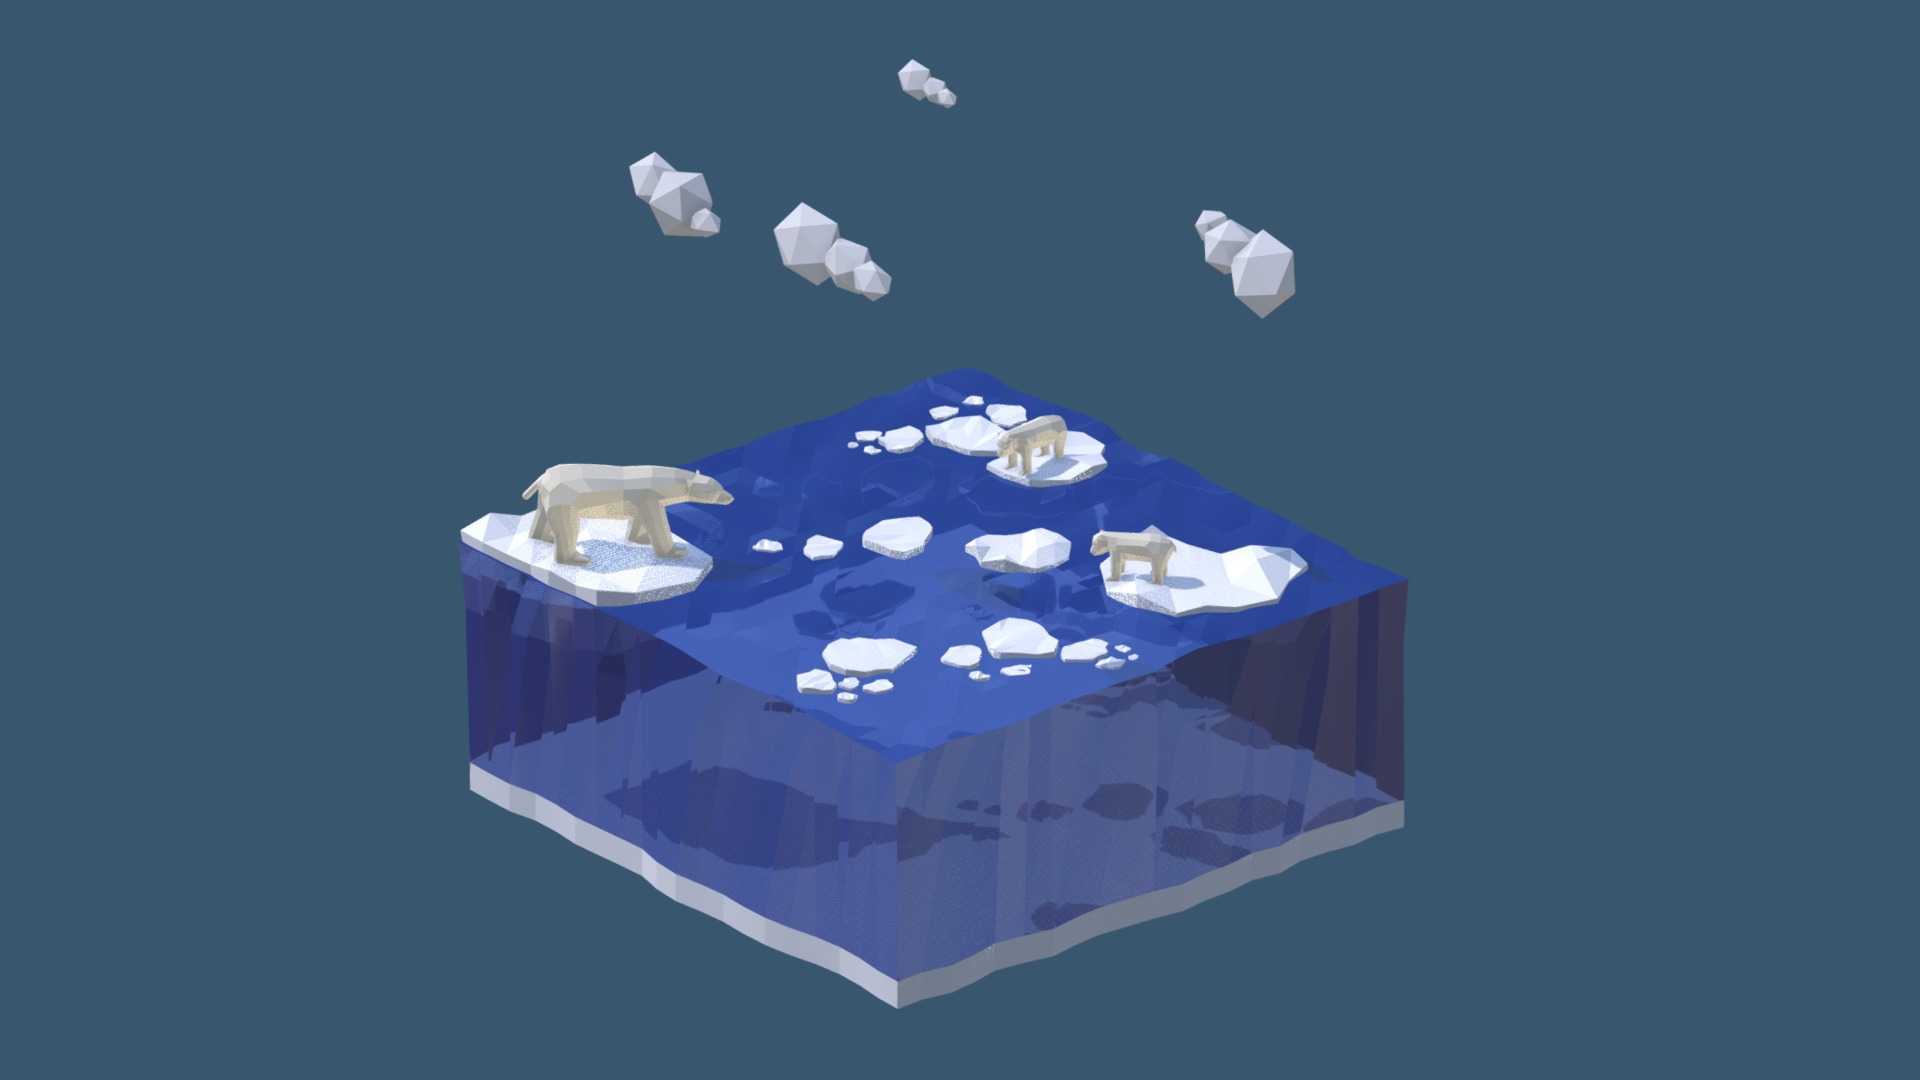 3D model Isometric Landscape Polar - This is a 3D model of the Isometric Landscape Polar. The 3D model is about a blue pillow with white objects on it.